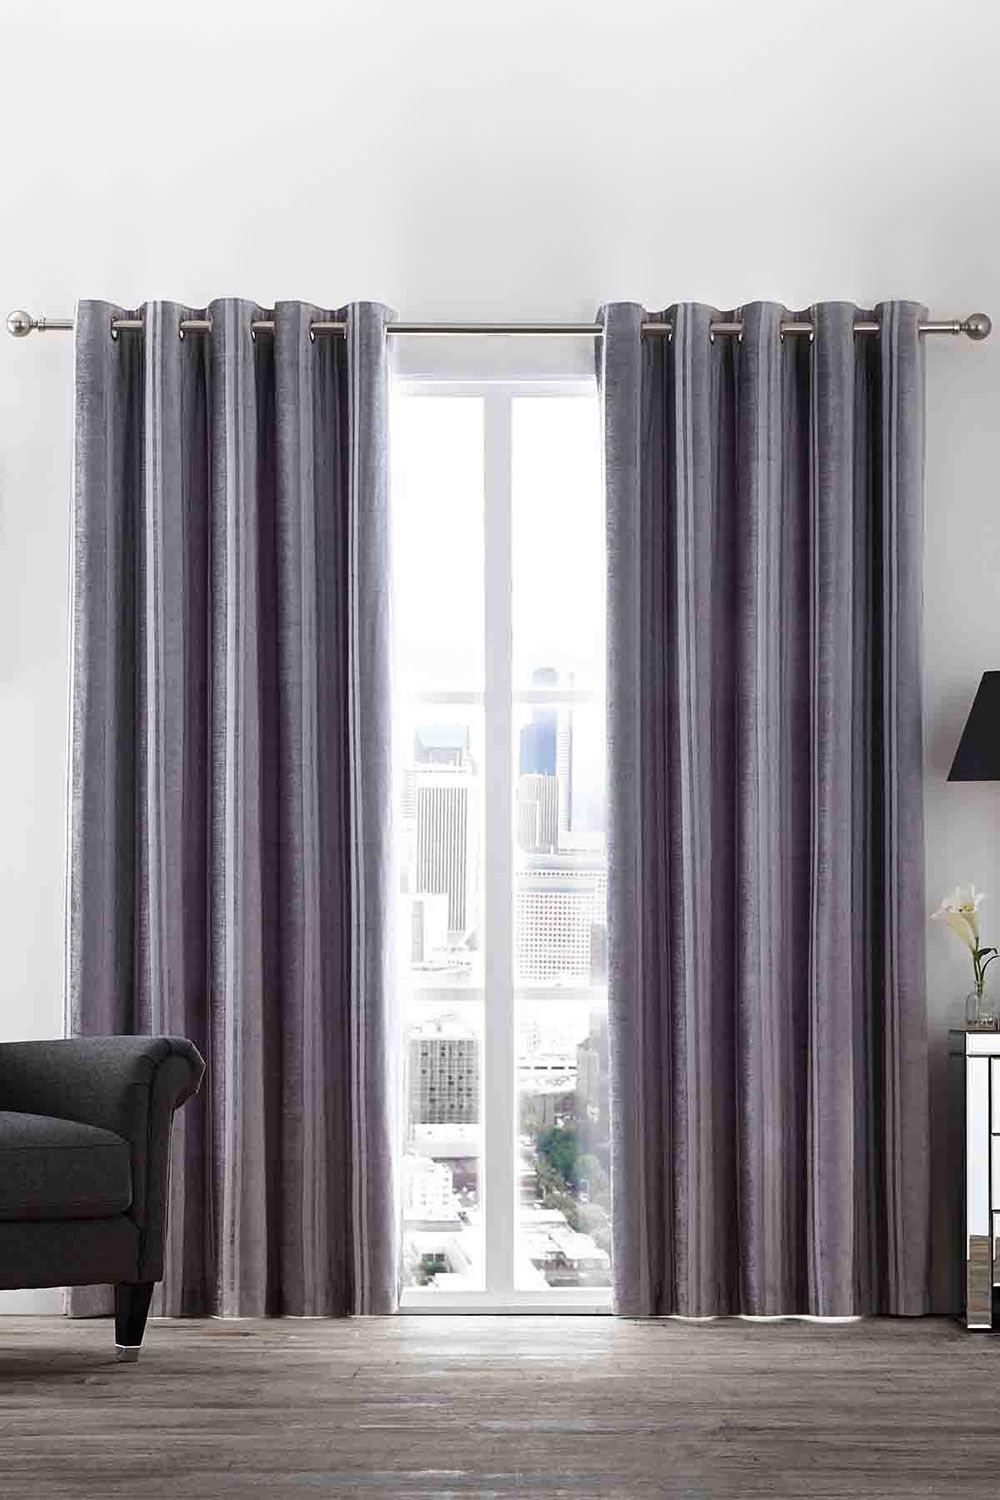 Bonmarche Hotel Stripe Silver Thermal Eyelet Curtain Pair, Size: 66 Inch